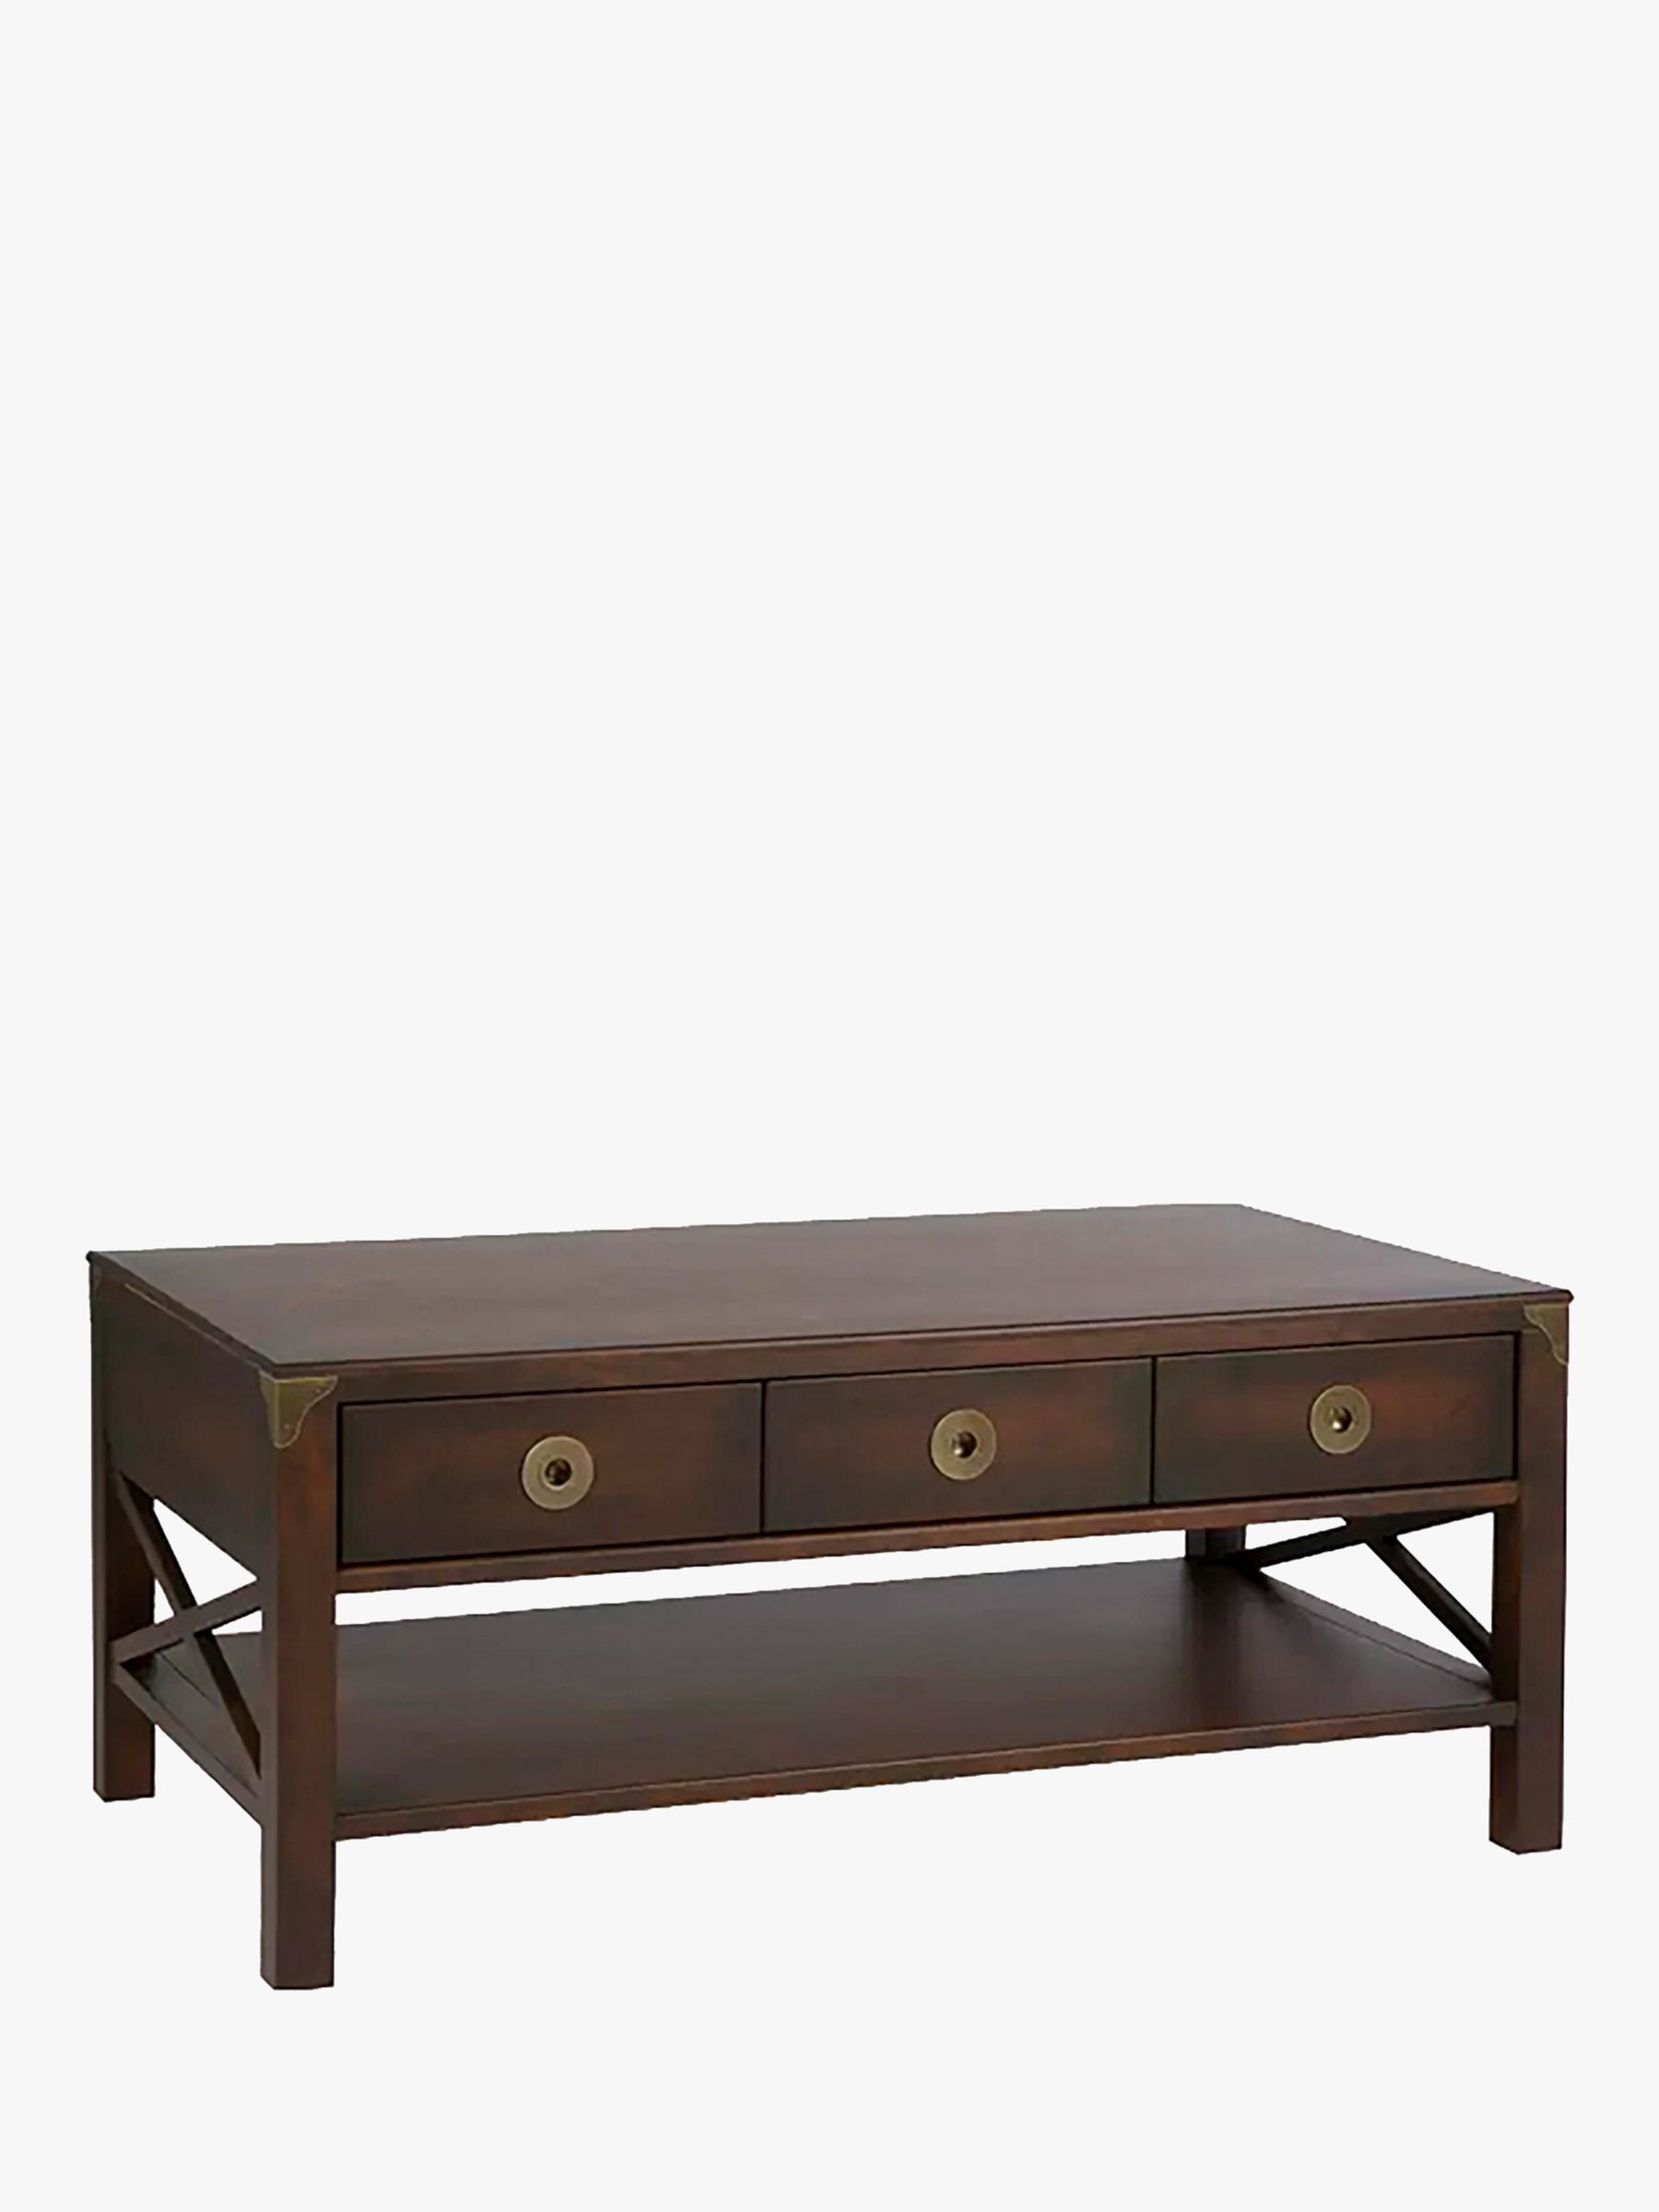 Photo of Laura ashley balmoral coffee table chestnut brown